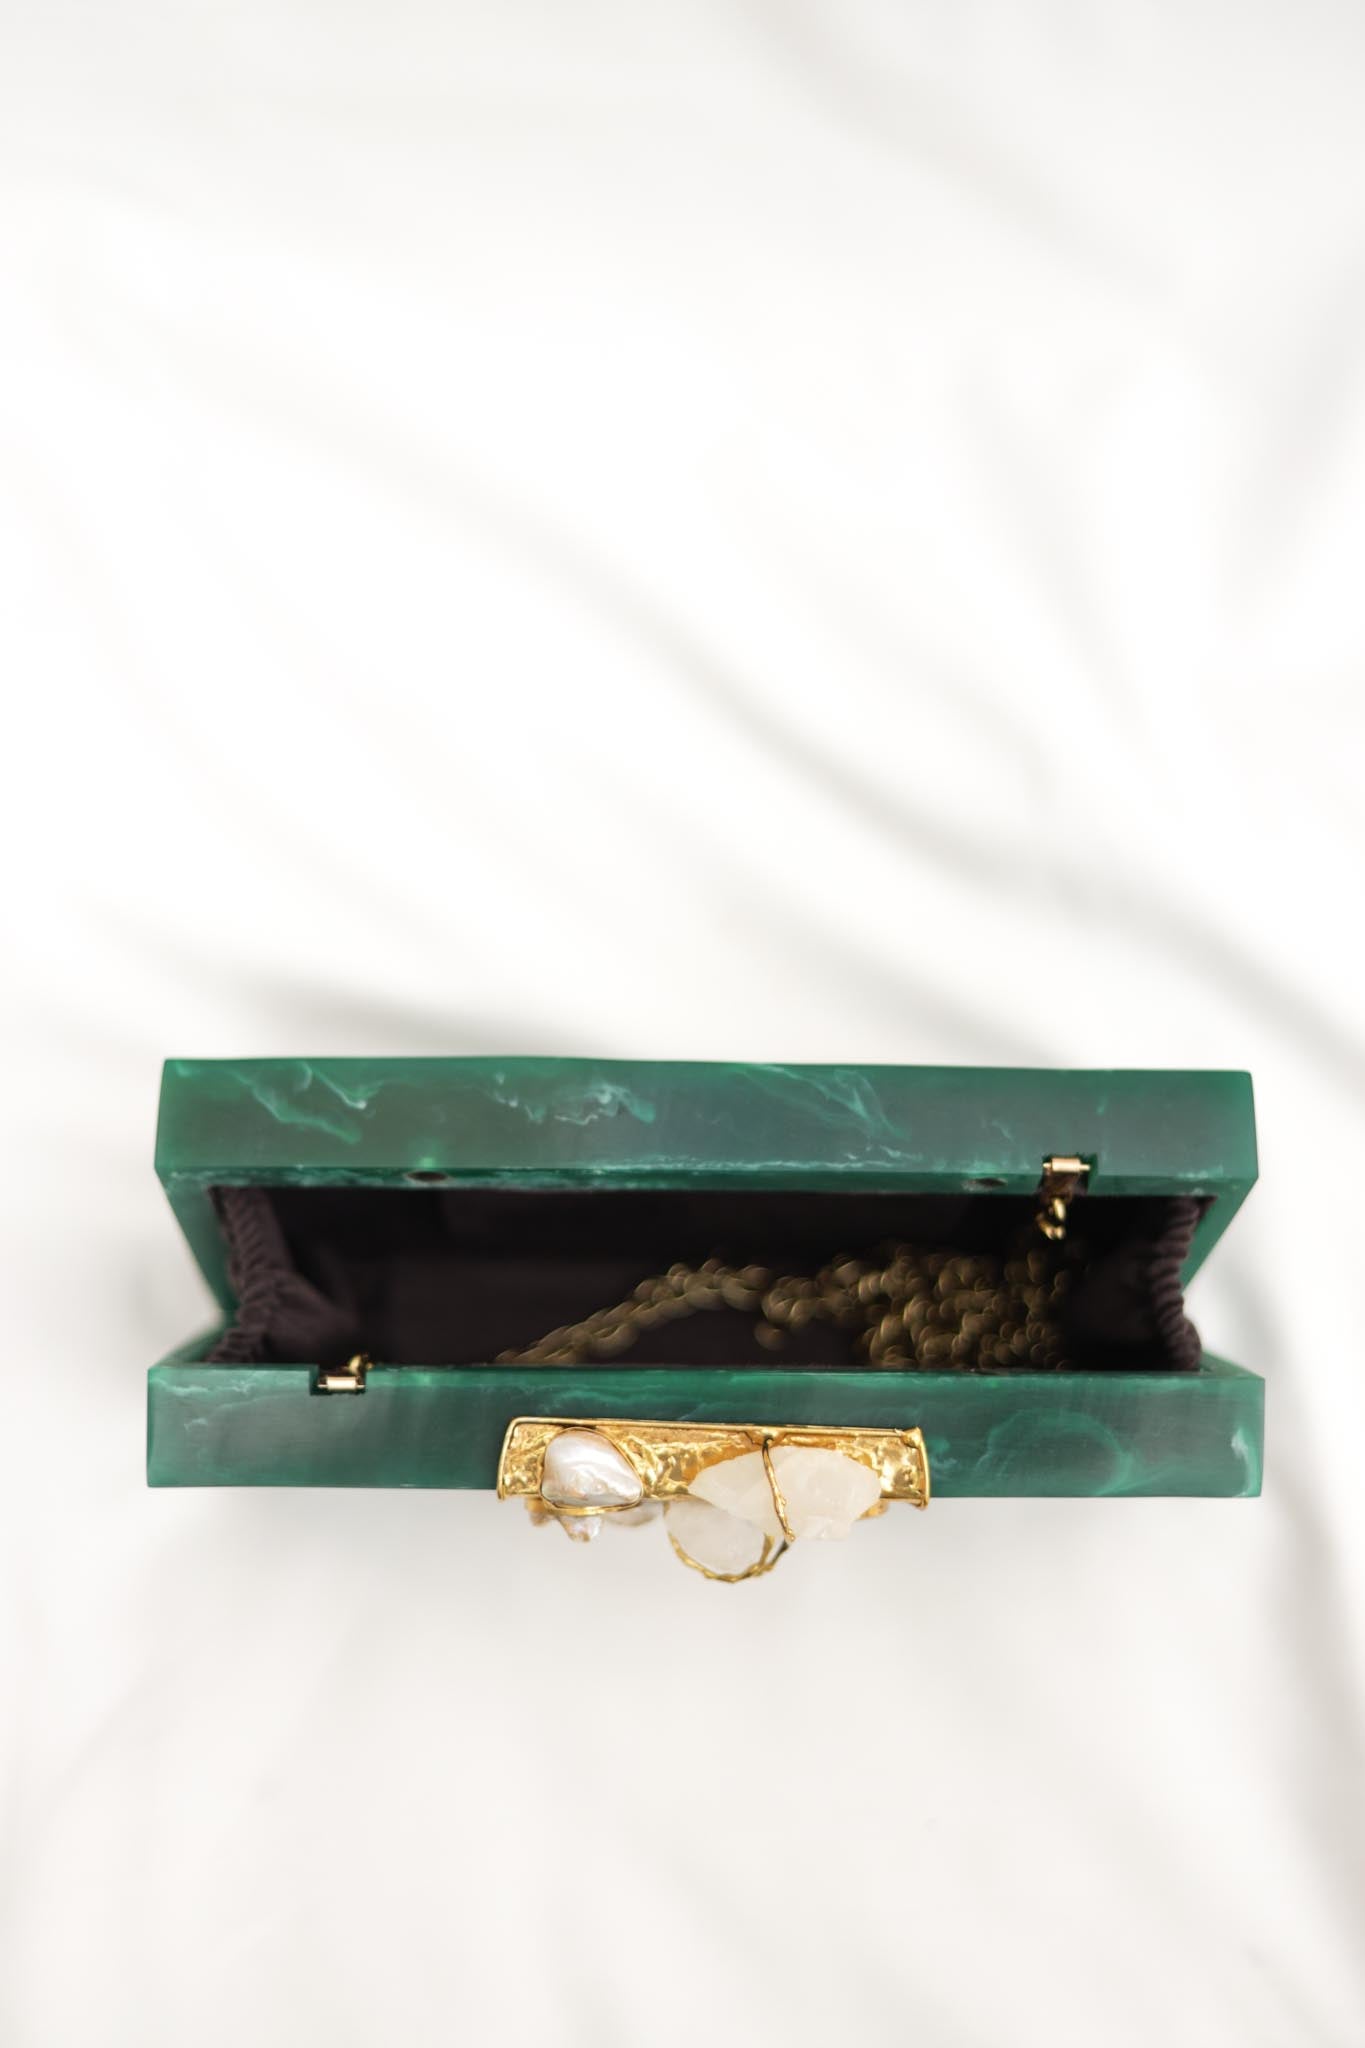 Captivate with Charm Clutch (Emerald Green)